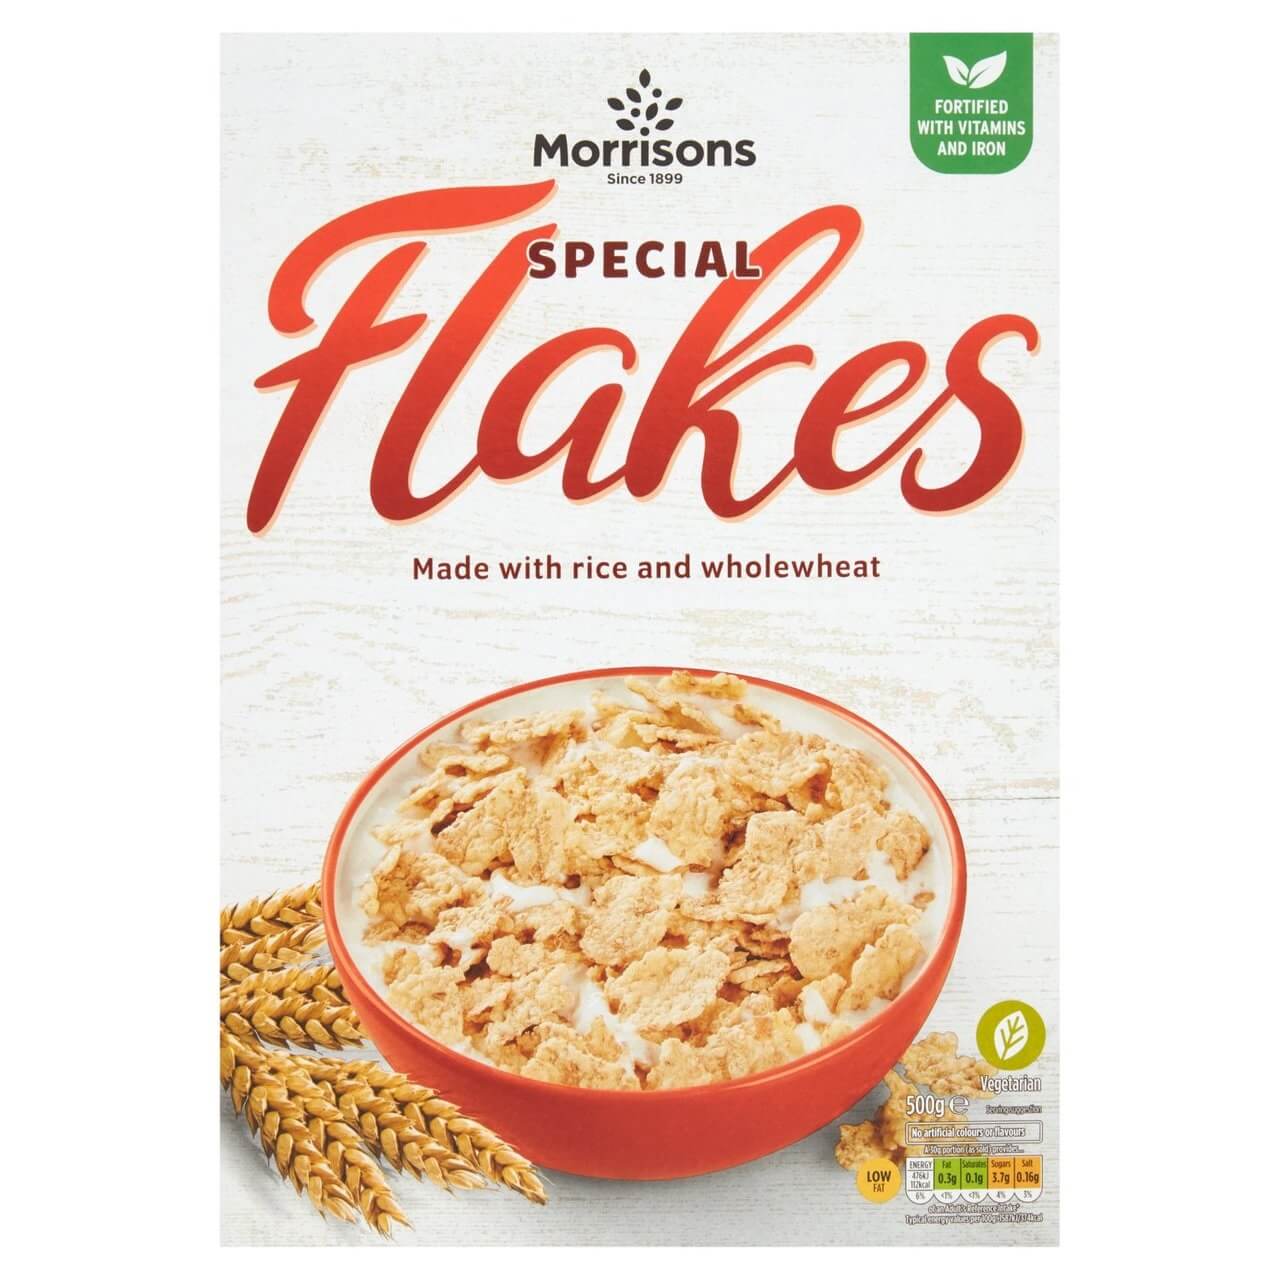 Image of Special Flakes made in the UK by Morrisons. Buying this product supports a UK business, jobs and the local community